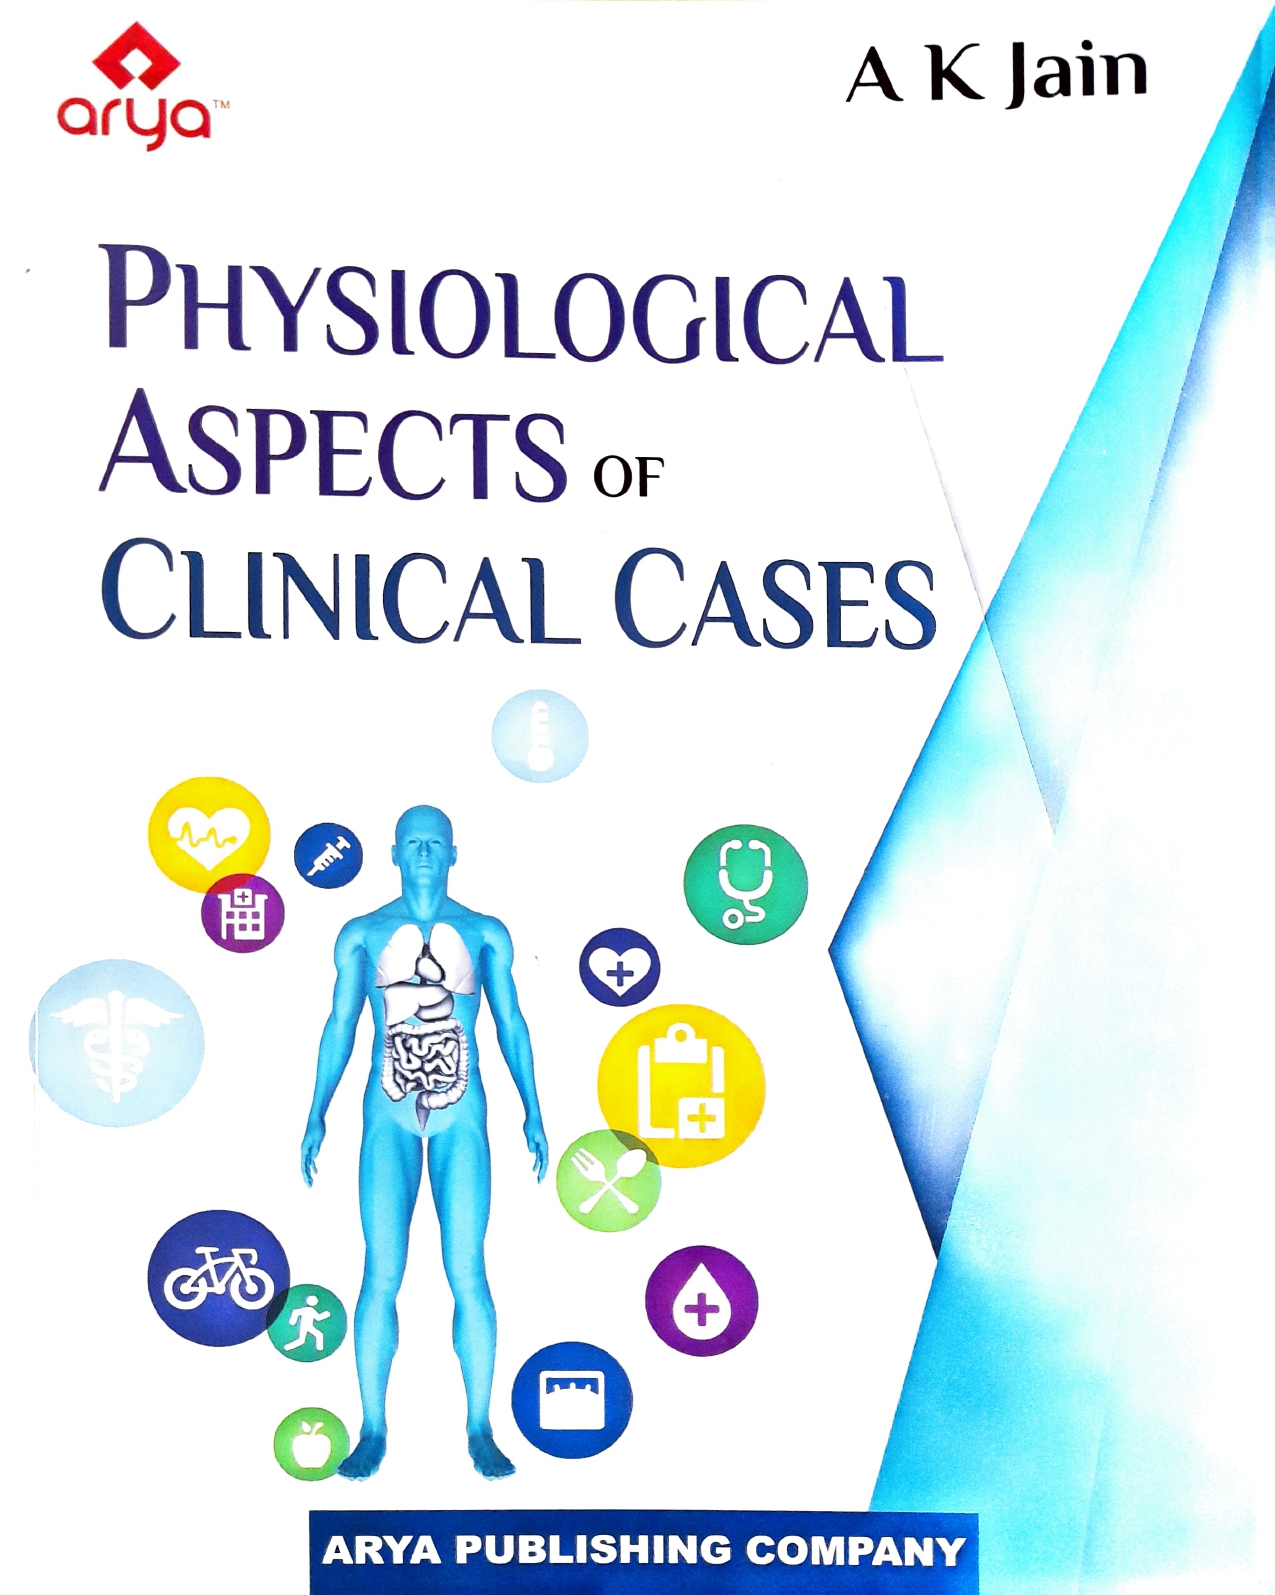 PHYSIOLOGICAL ASPECTS OF CLINICAL CASES